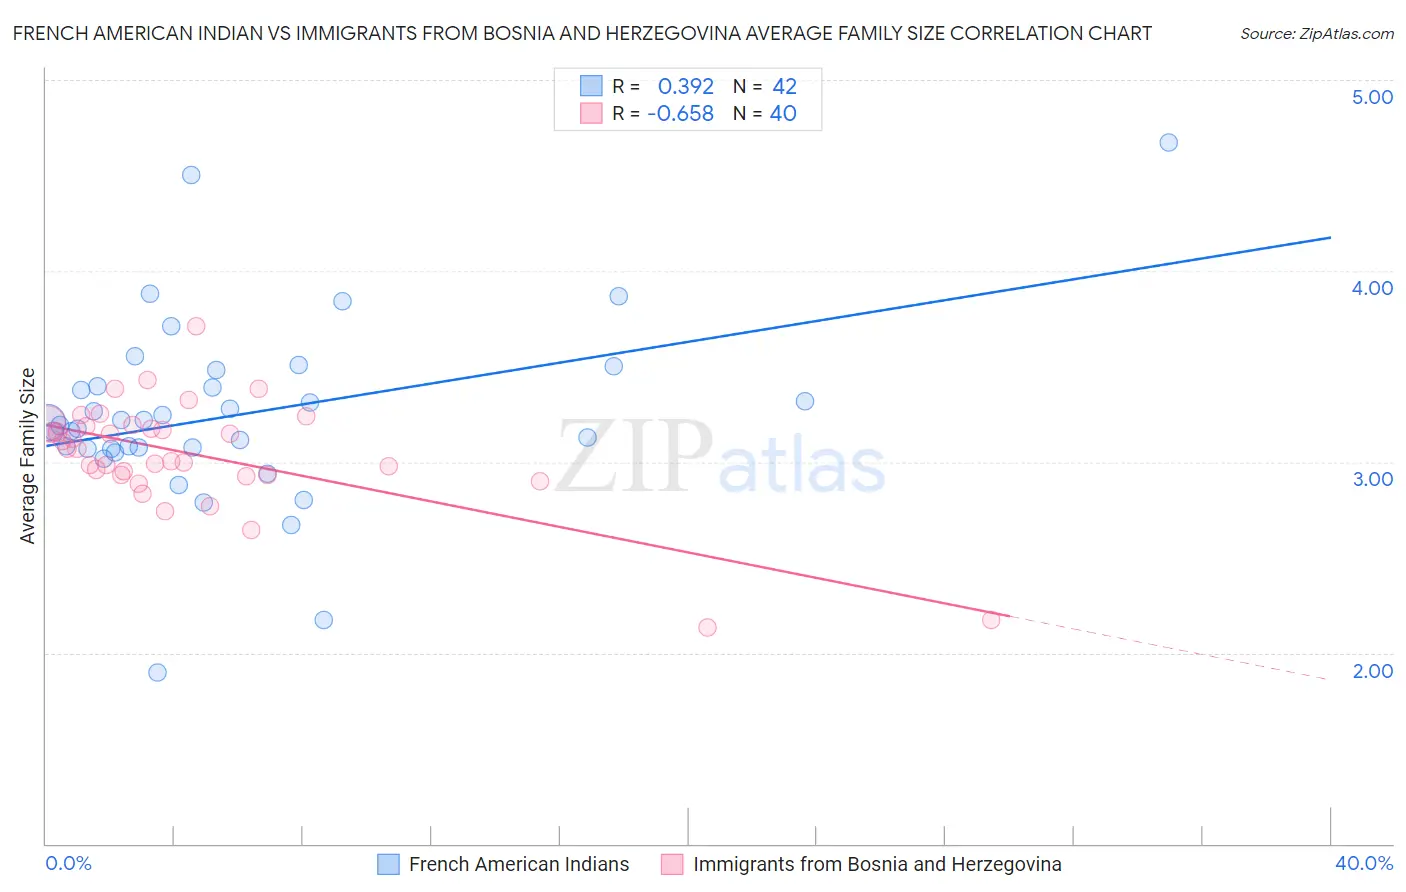 French American Indian vs Immigrants from Bosnia and Herzegovina Average Family Size